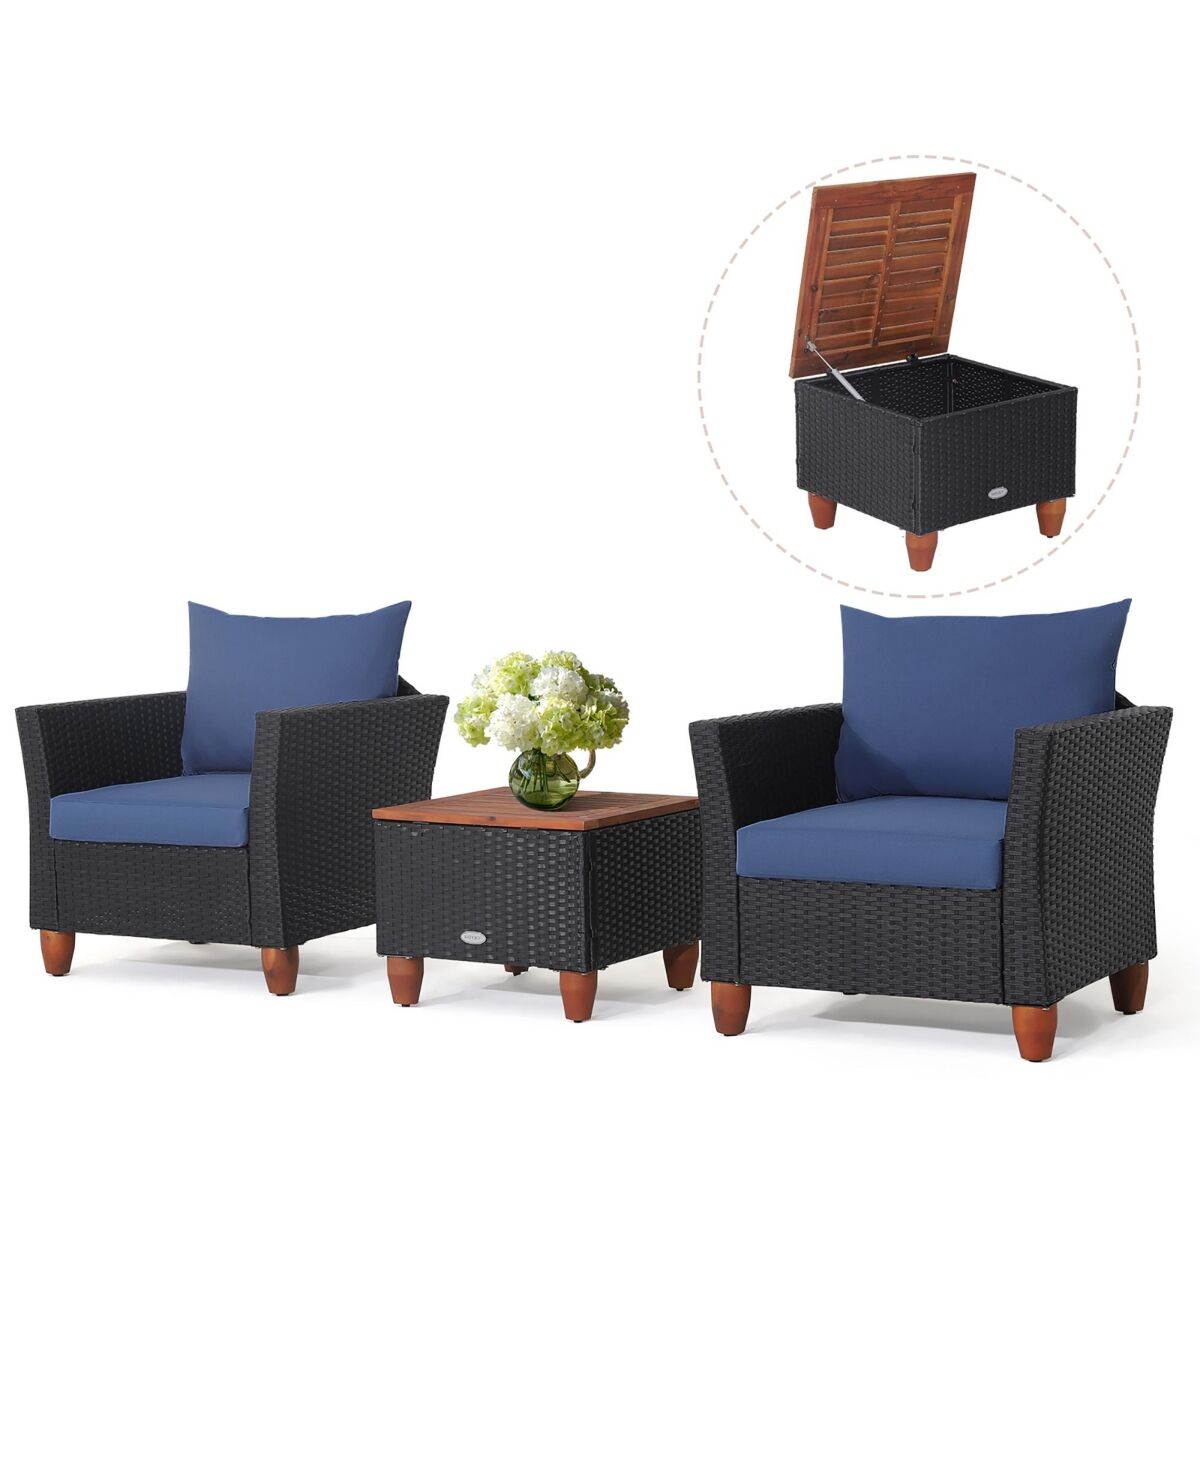 Costway 3PCS Patio Rattan Furniture Set Cushioned Sofa Storage Table with Wood Top - Navy